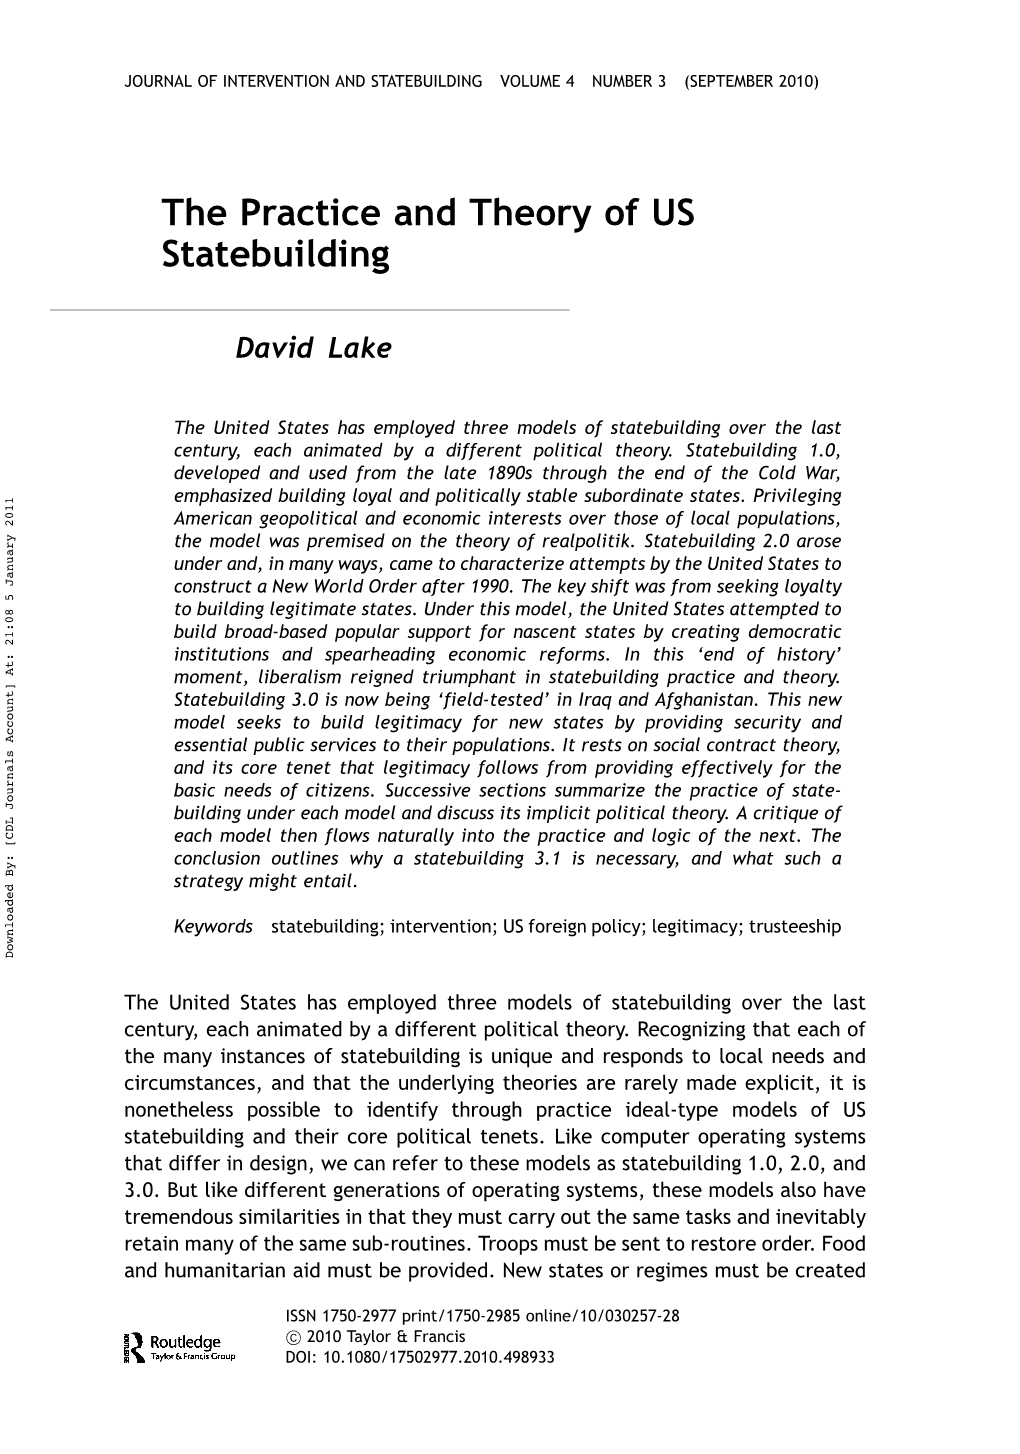 The Practice and Theory of US Statebuilding